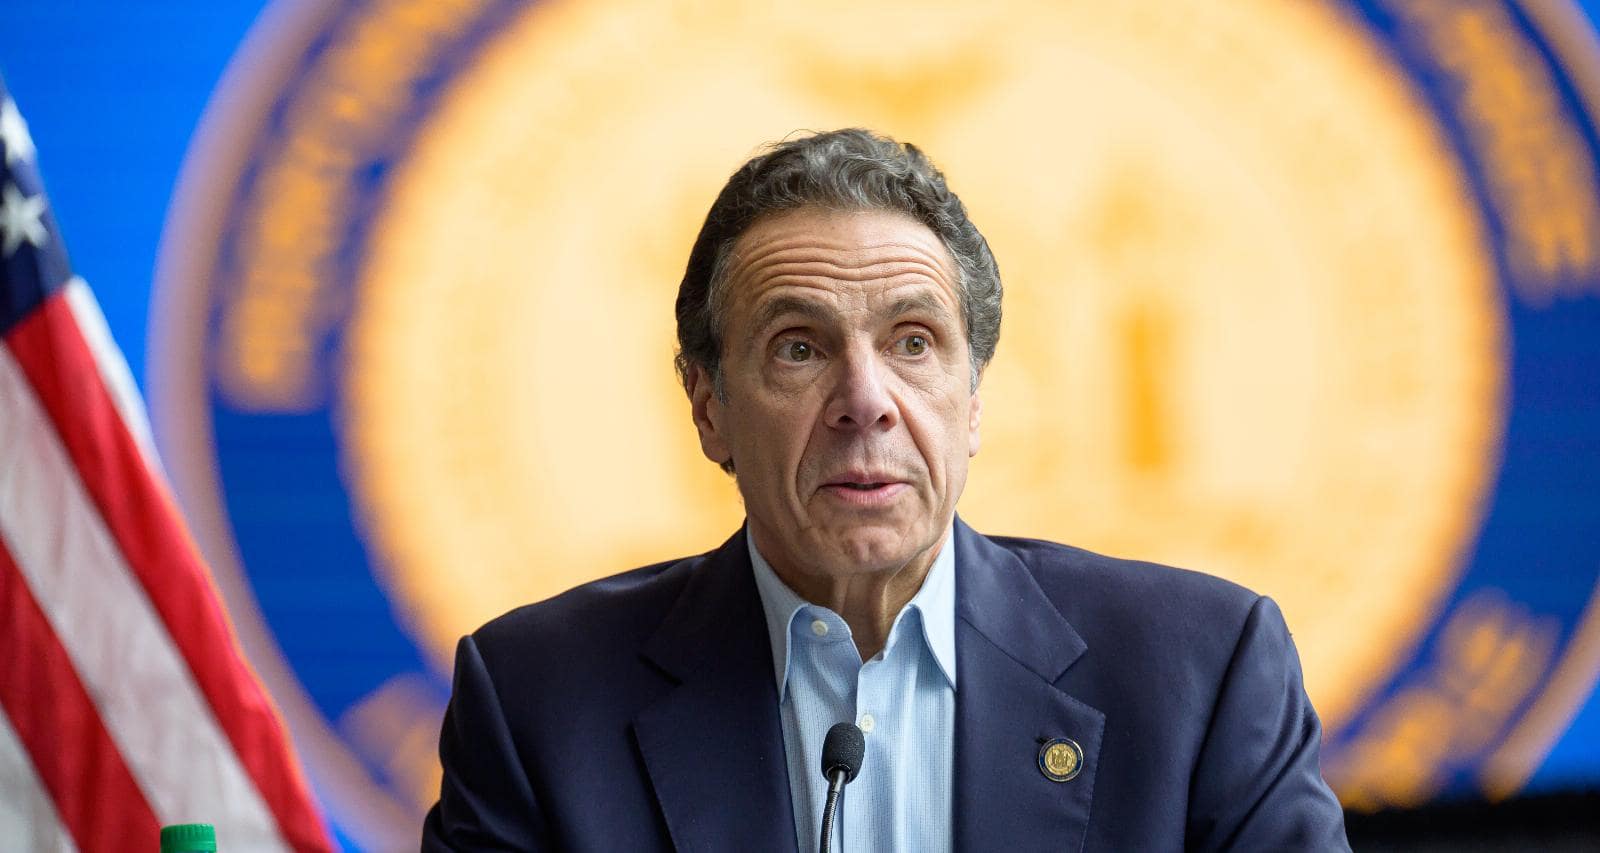 Andrew Cuomo Net Worth: How Much Does the New York State Governor Earn?